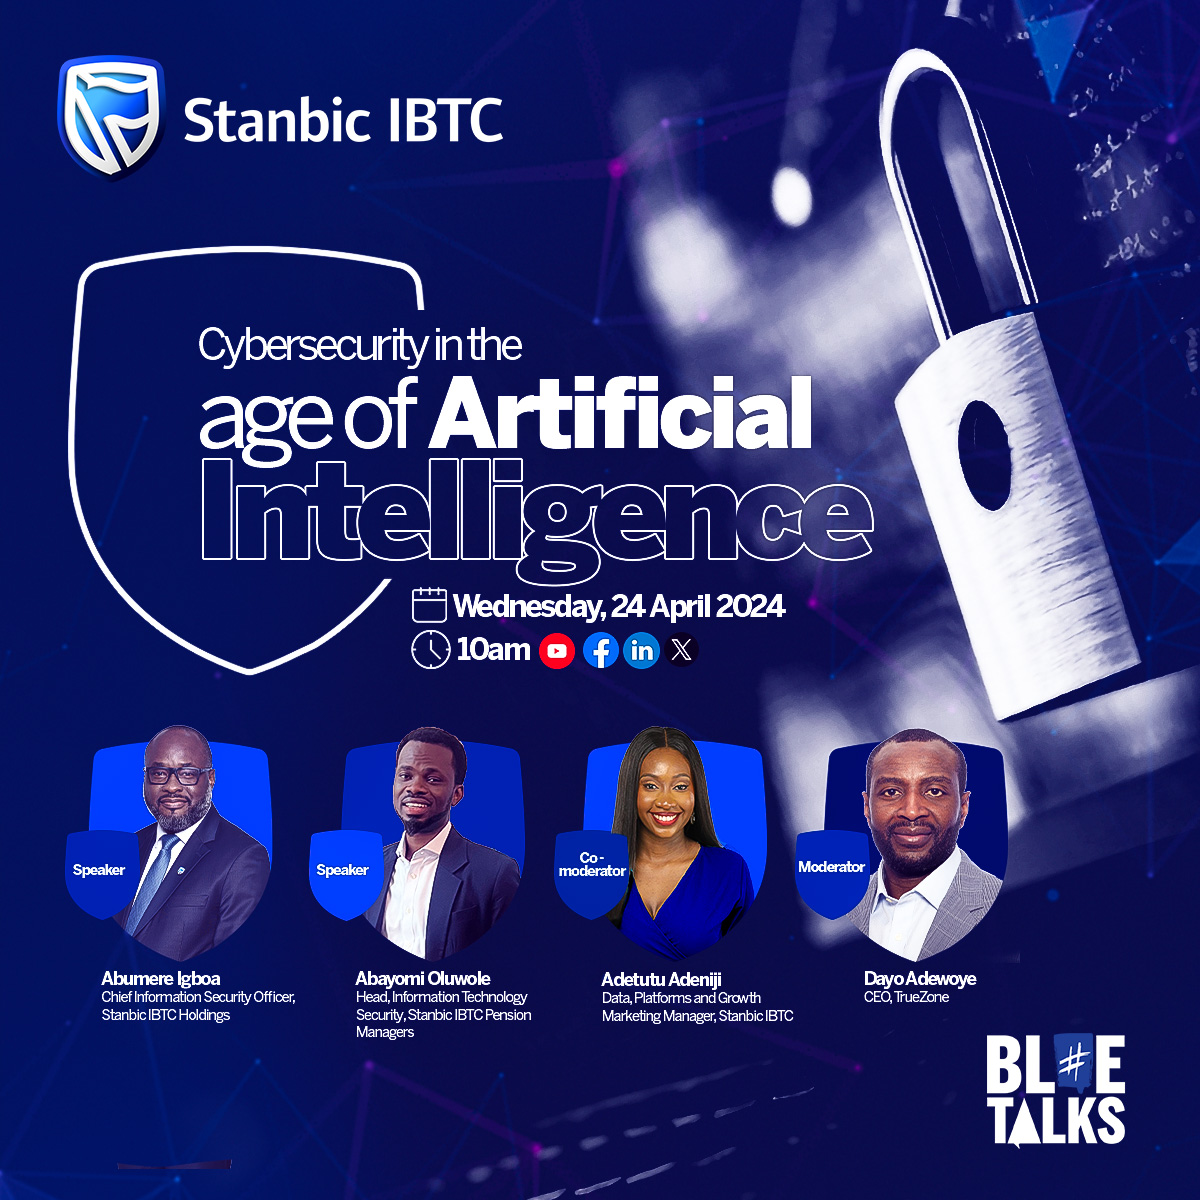 It’s happening today!​ Our panelists are geared up to discuss the implications of AI on cybersecurity at 10 a.m. ​ Visit our YouTube page and other social media channels (Facebook, LinkedIn, and X) to join the conversation.​ #StanbicIBTC